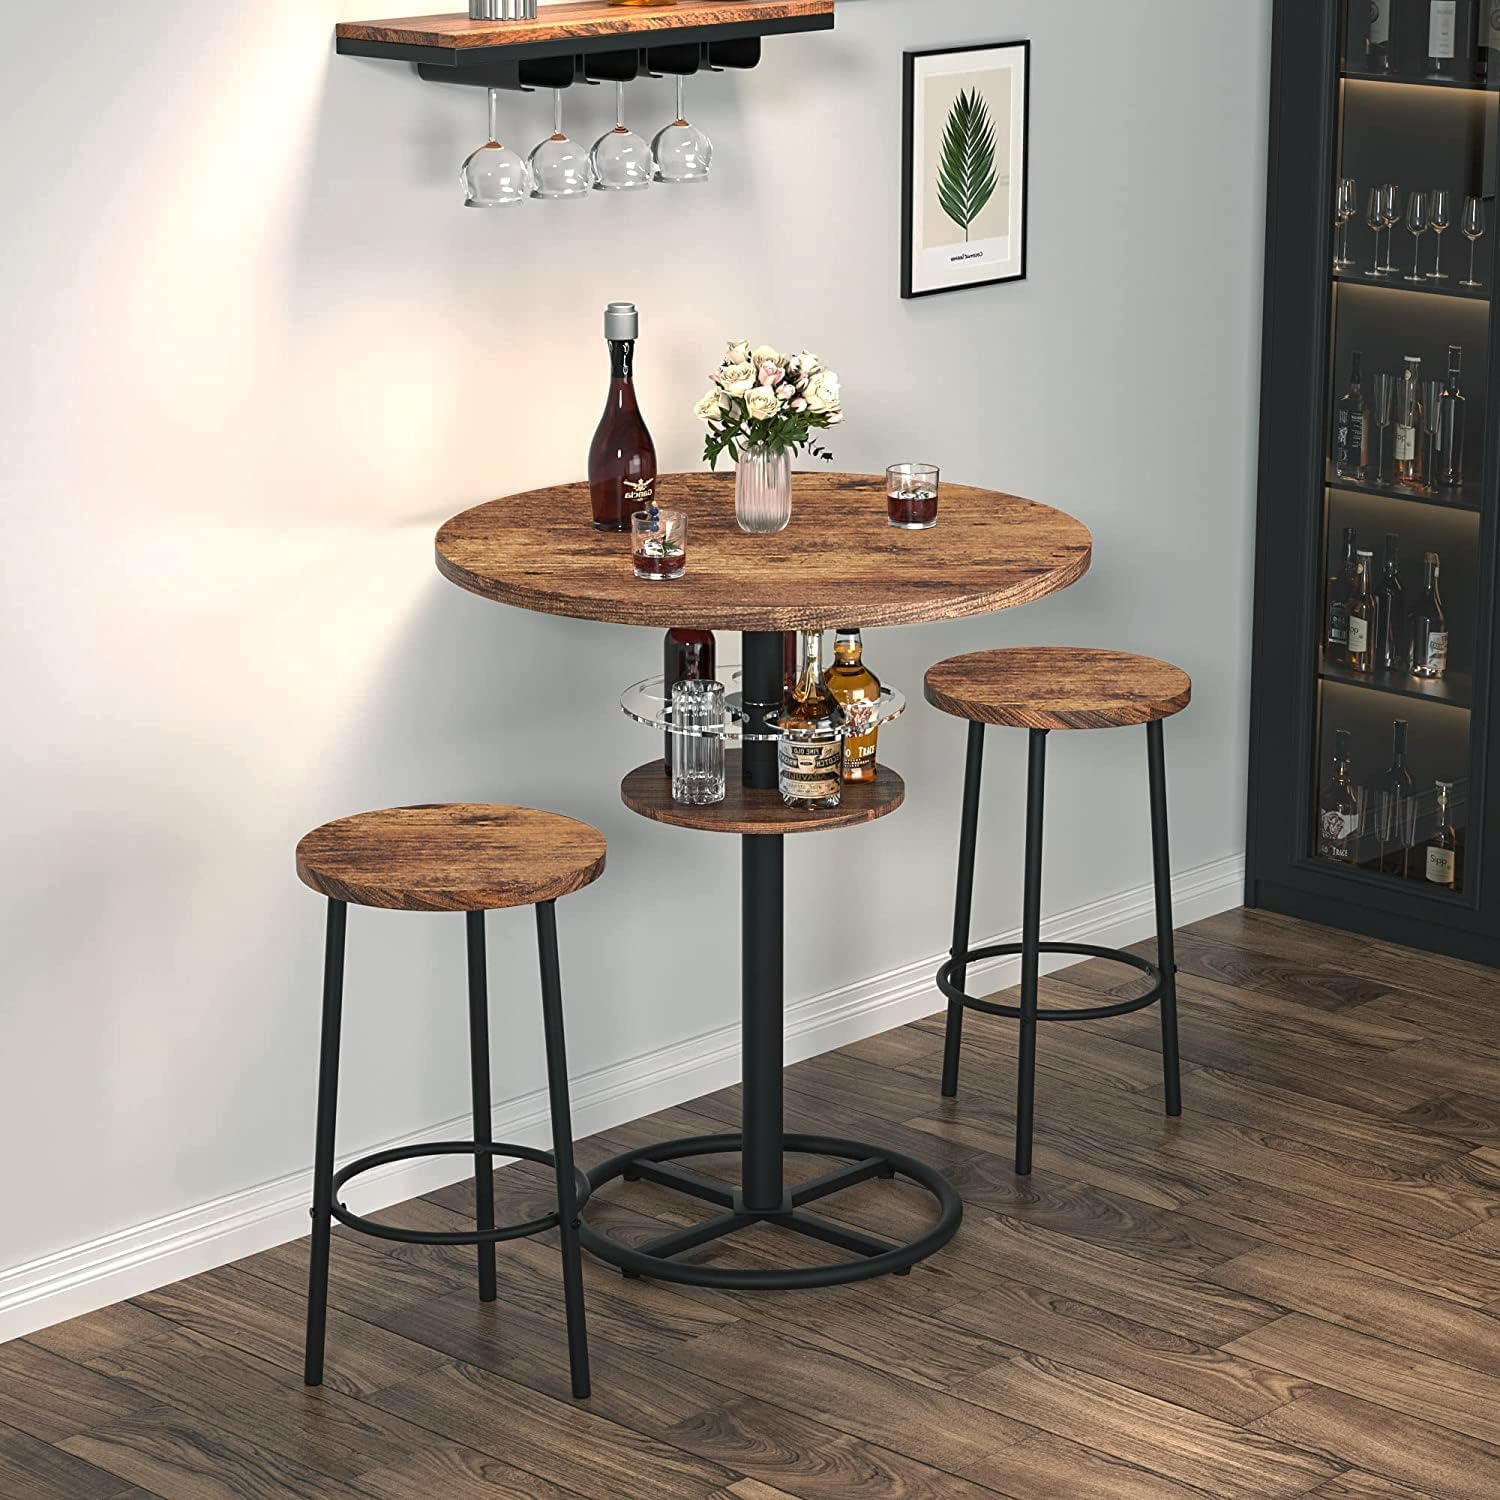 VECELO 3 Piece Bar Table Set, Small 2-Tier Round Pub Table with Barstools